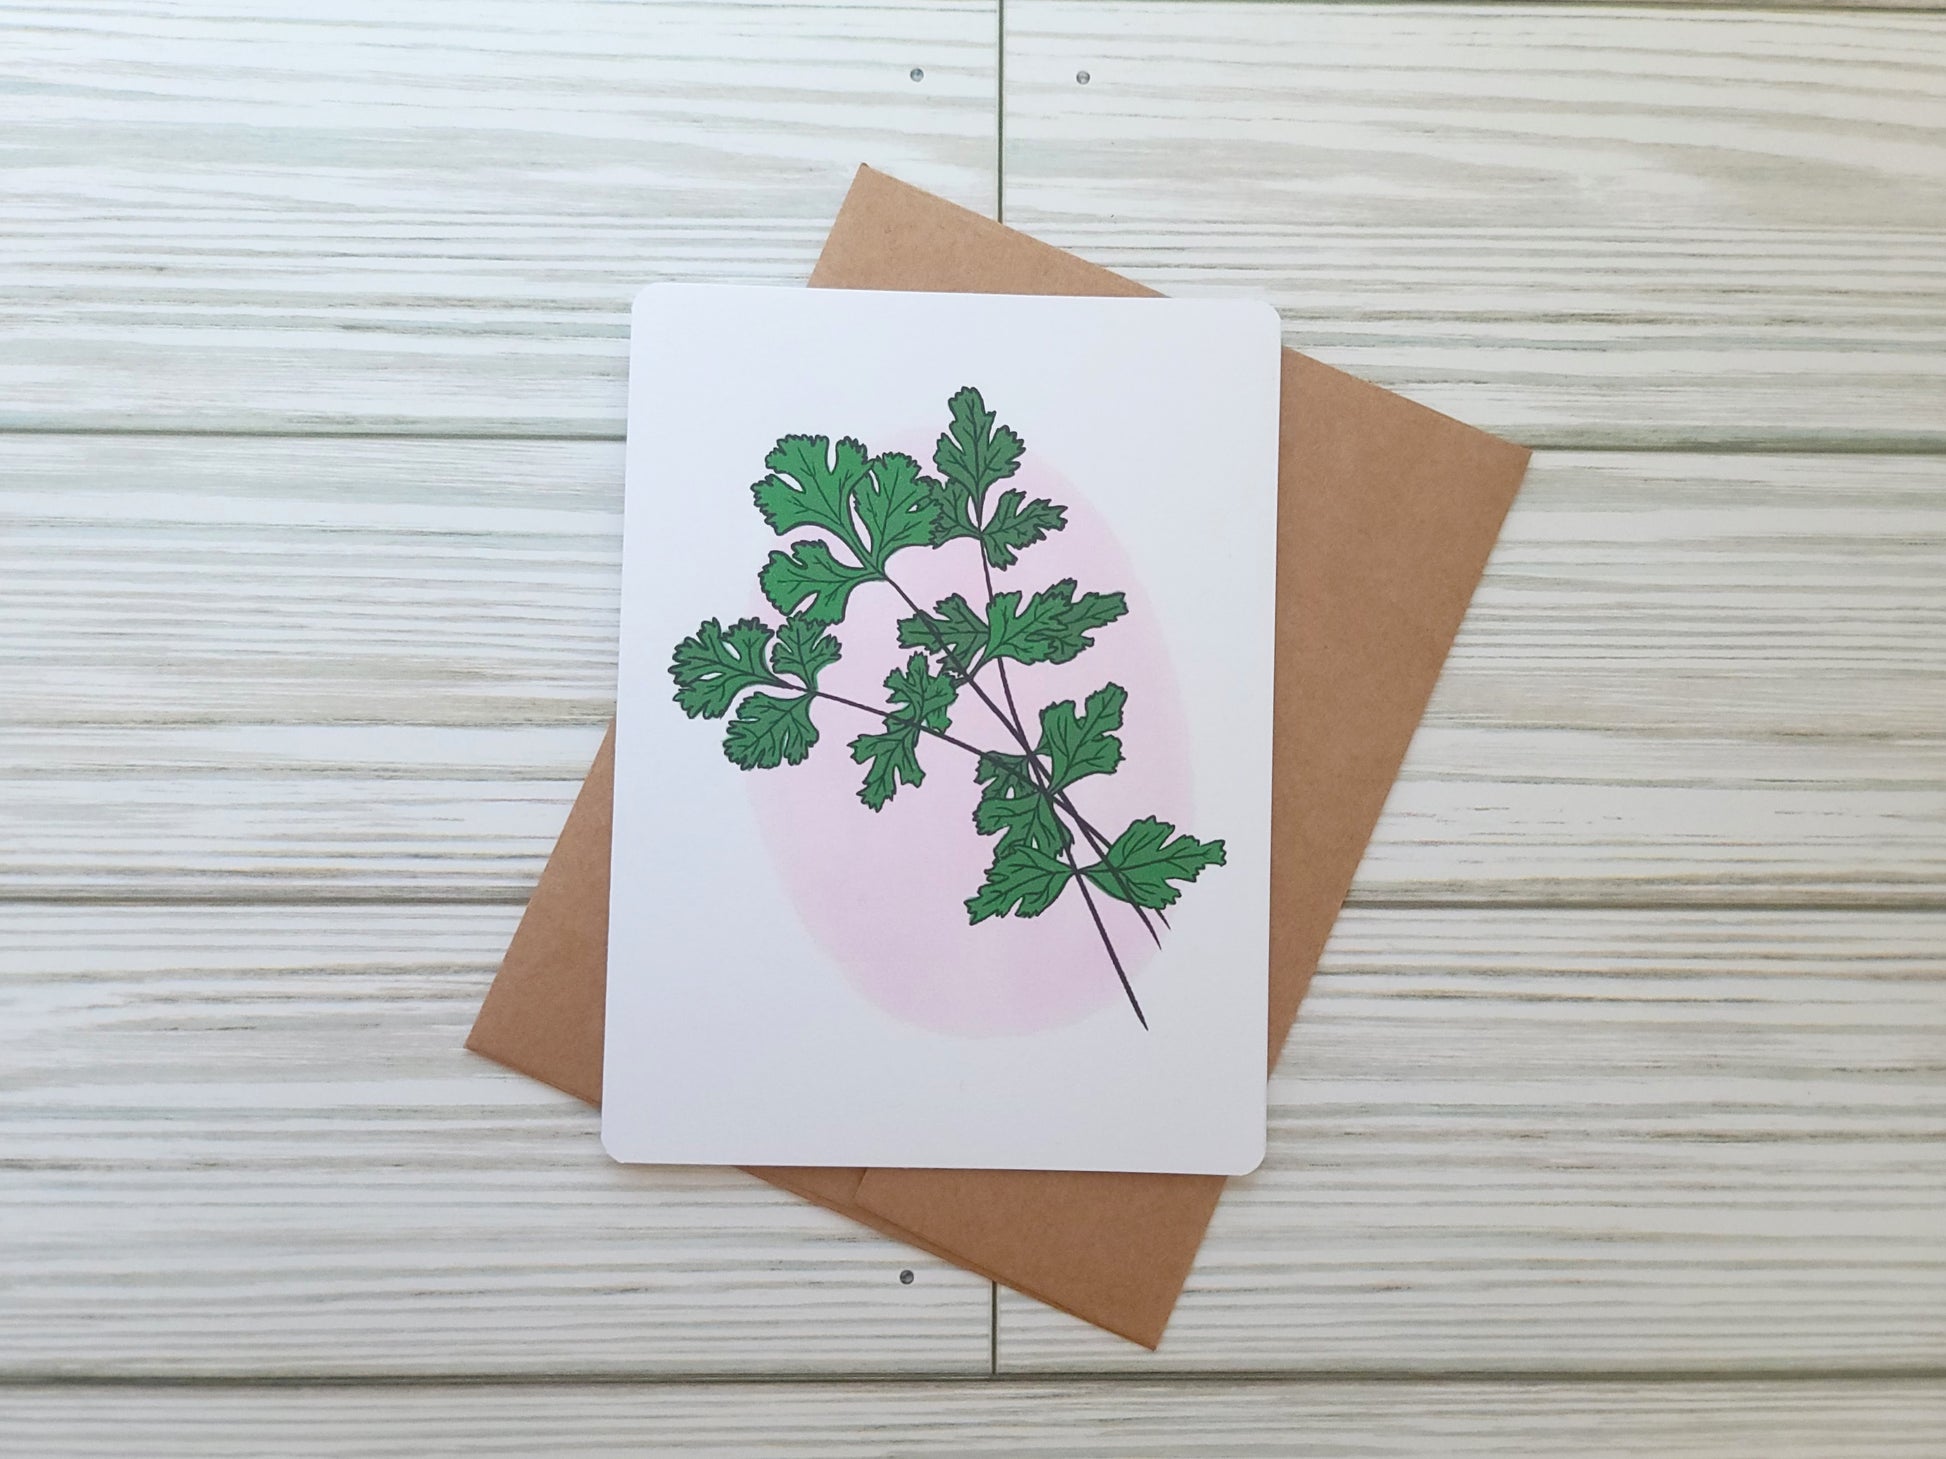 Cilantro Handmade Greeting Card - Recycled Paper and Kraft Envelope - Landscape Overhead Shot